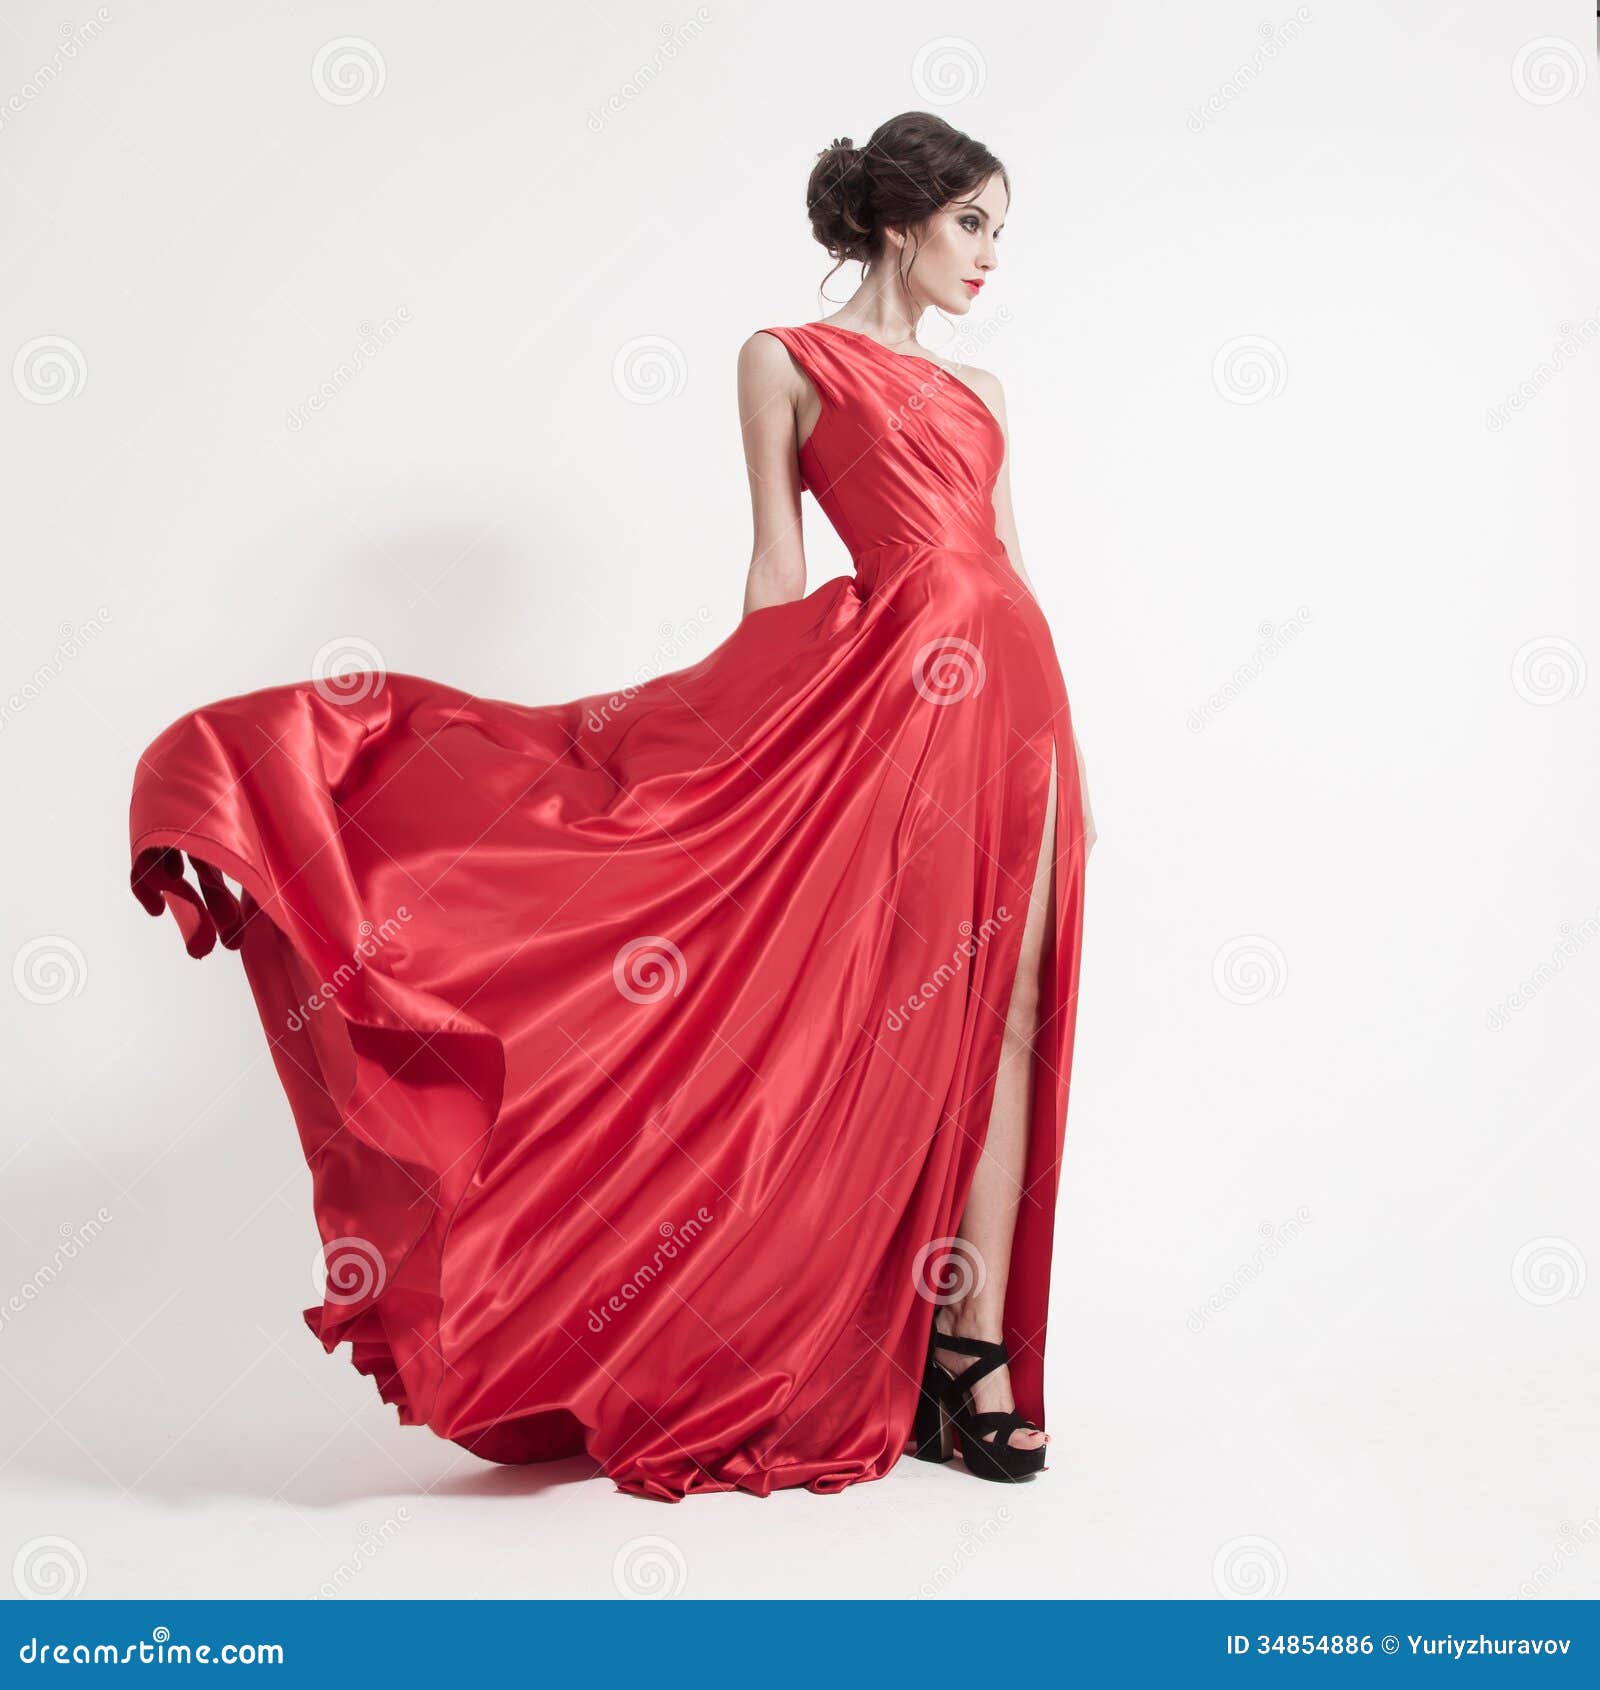 young beauty woman in fluttering red dress. white background.